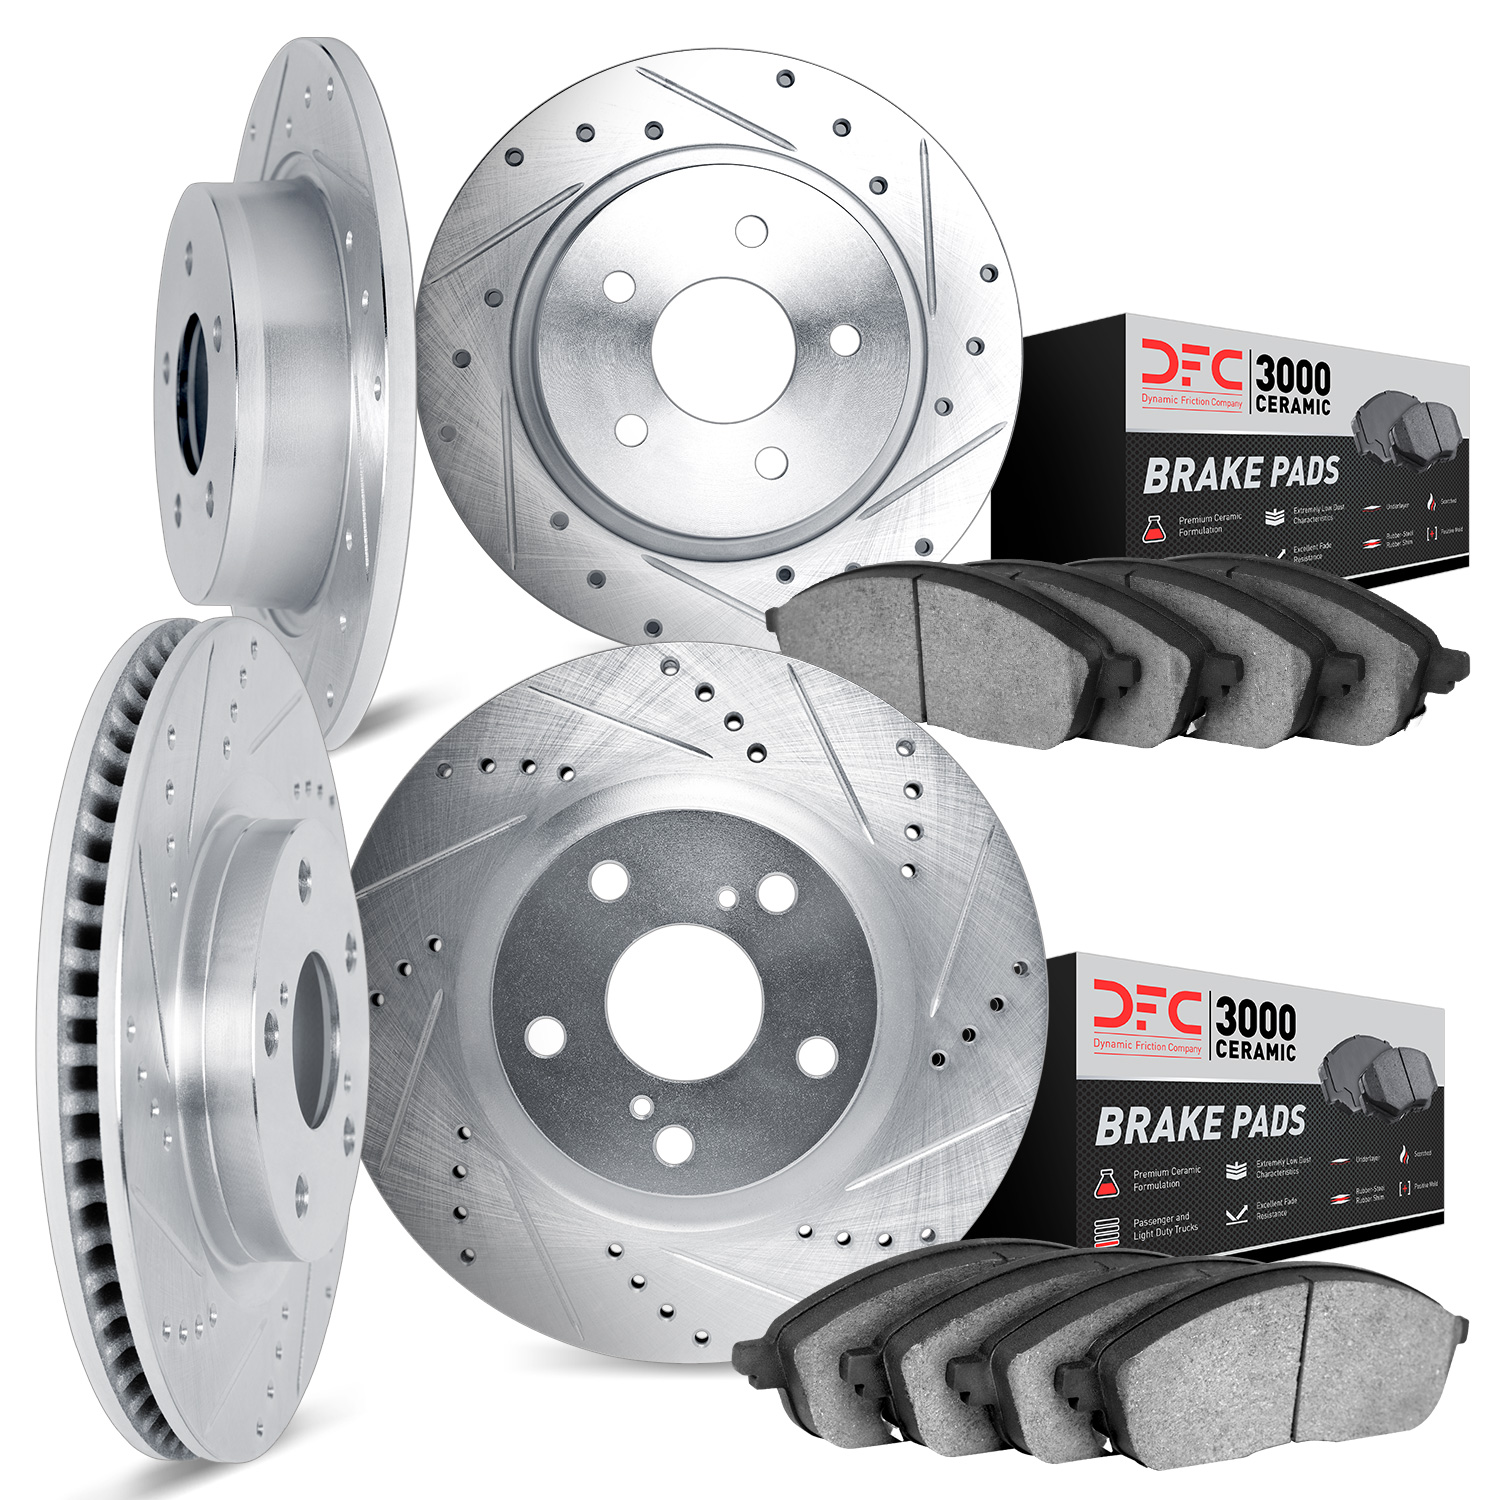 7304-54024 Drilled/Slotted Brake Rotor with 3000-Series Ceramic Brake Pads Kit [Silver], 1993-2000 Ford/Lincoln/Mercury/Mazda, P